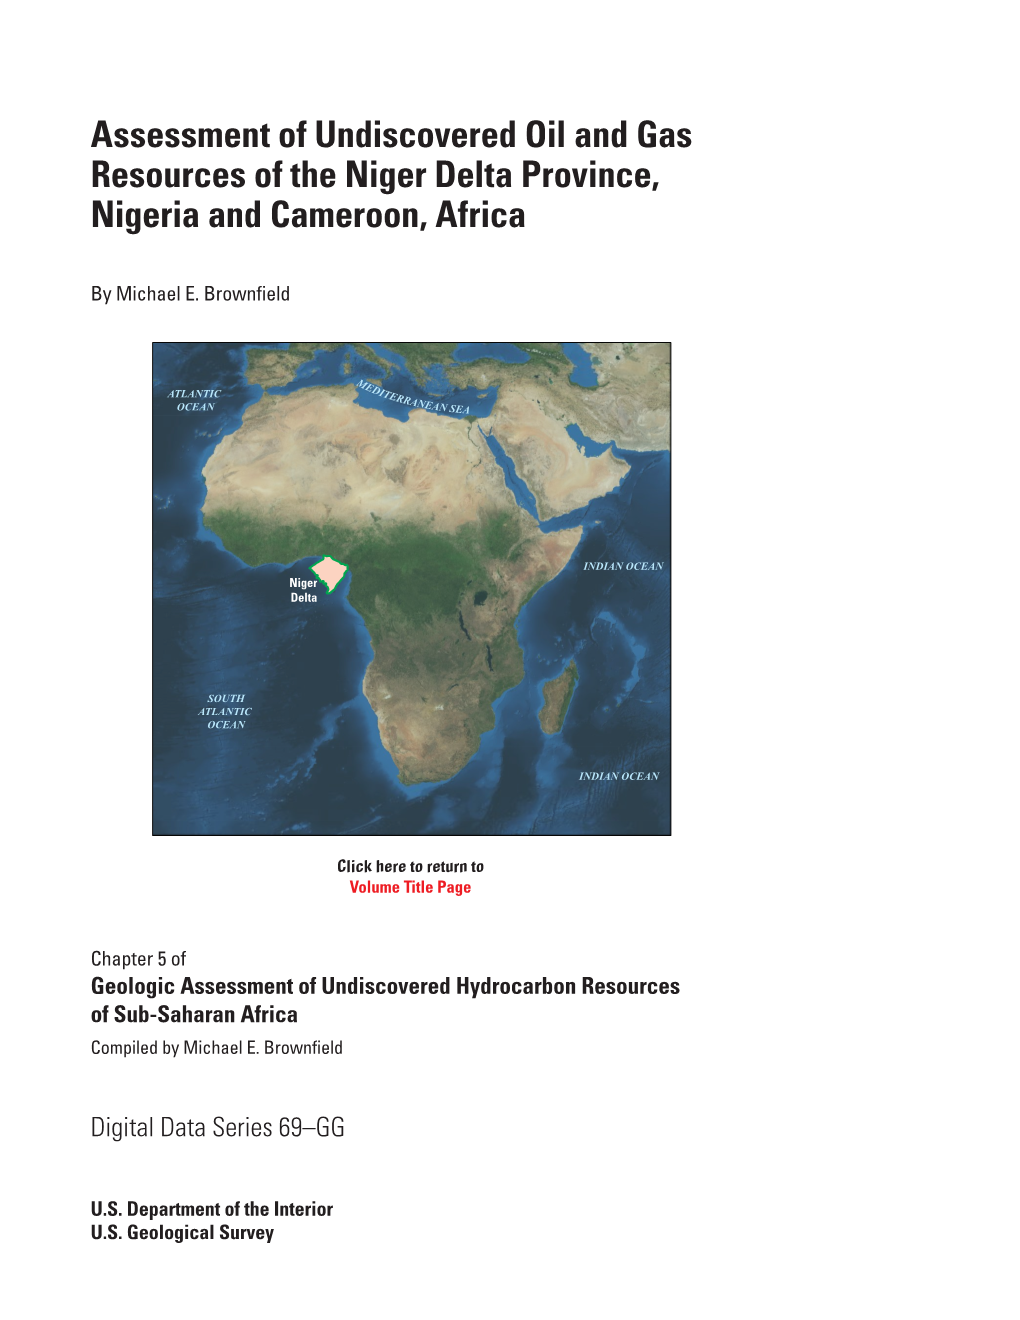 Assessment of Undiscovered Oil and Gas Resources of the Niger Delta Province, Nigeria and Cameroon, Africa